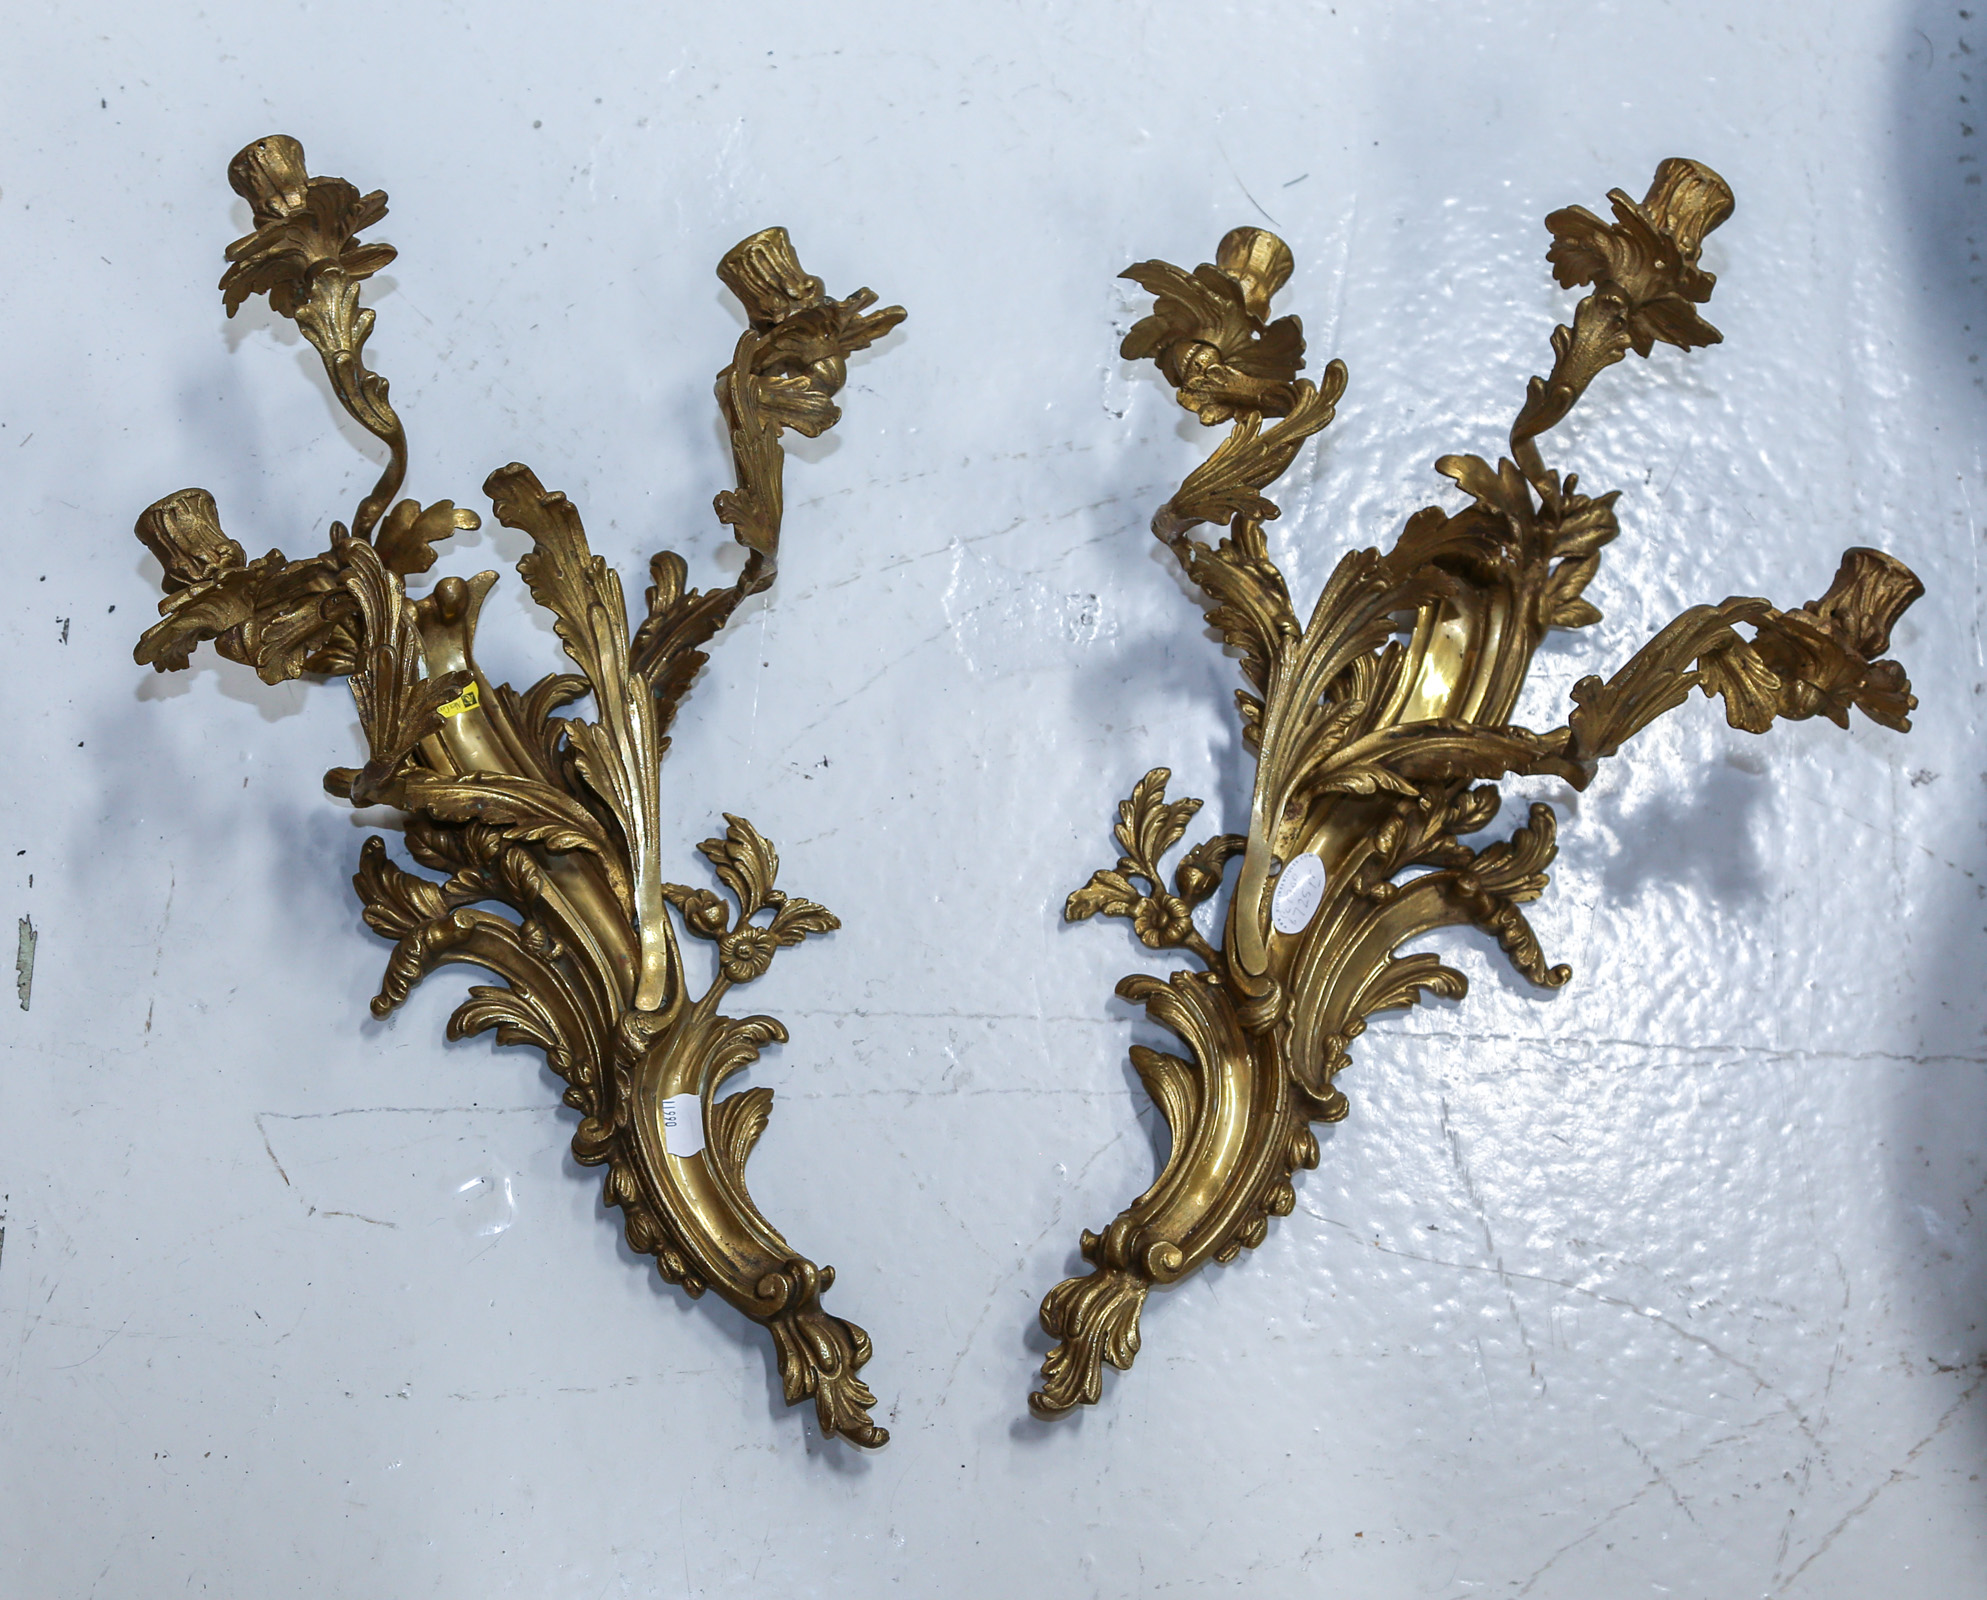 A PAIR OF ROCOCO GILT BRONZE CANDLE 3cb22d